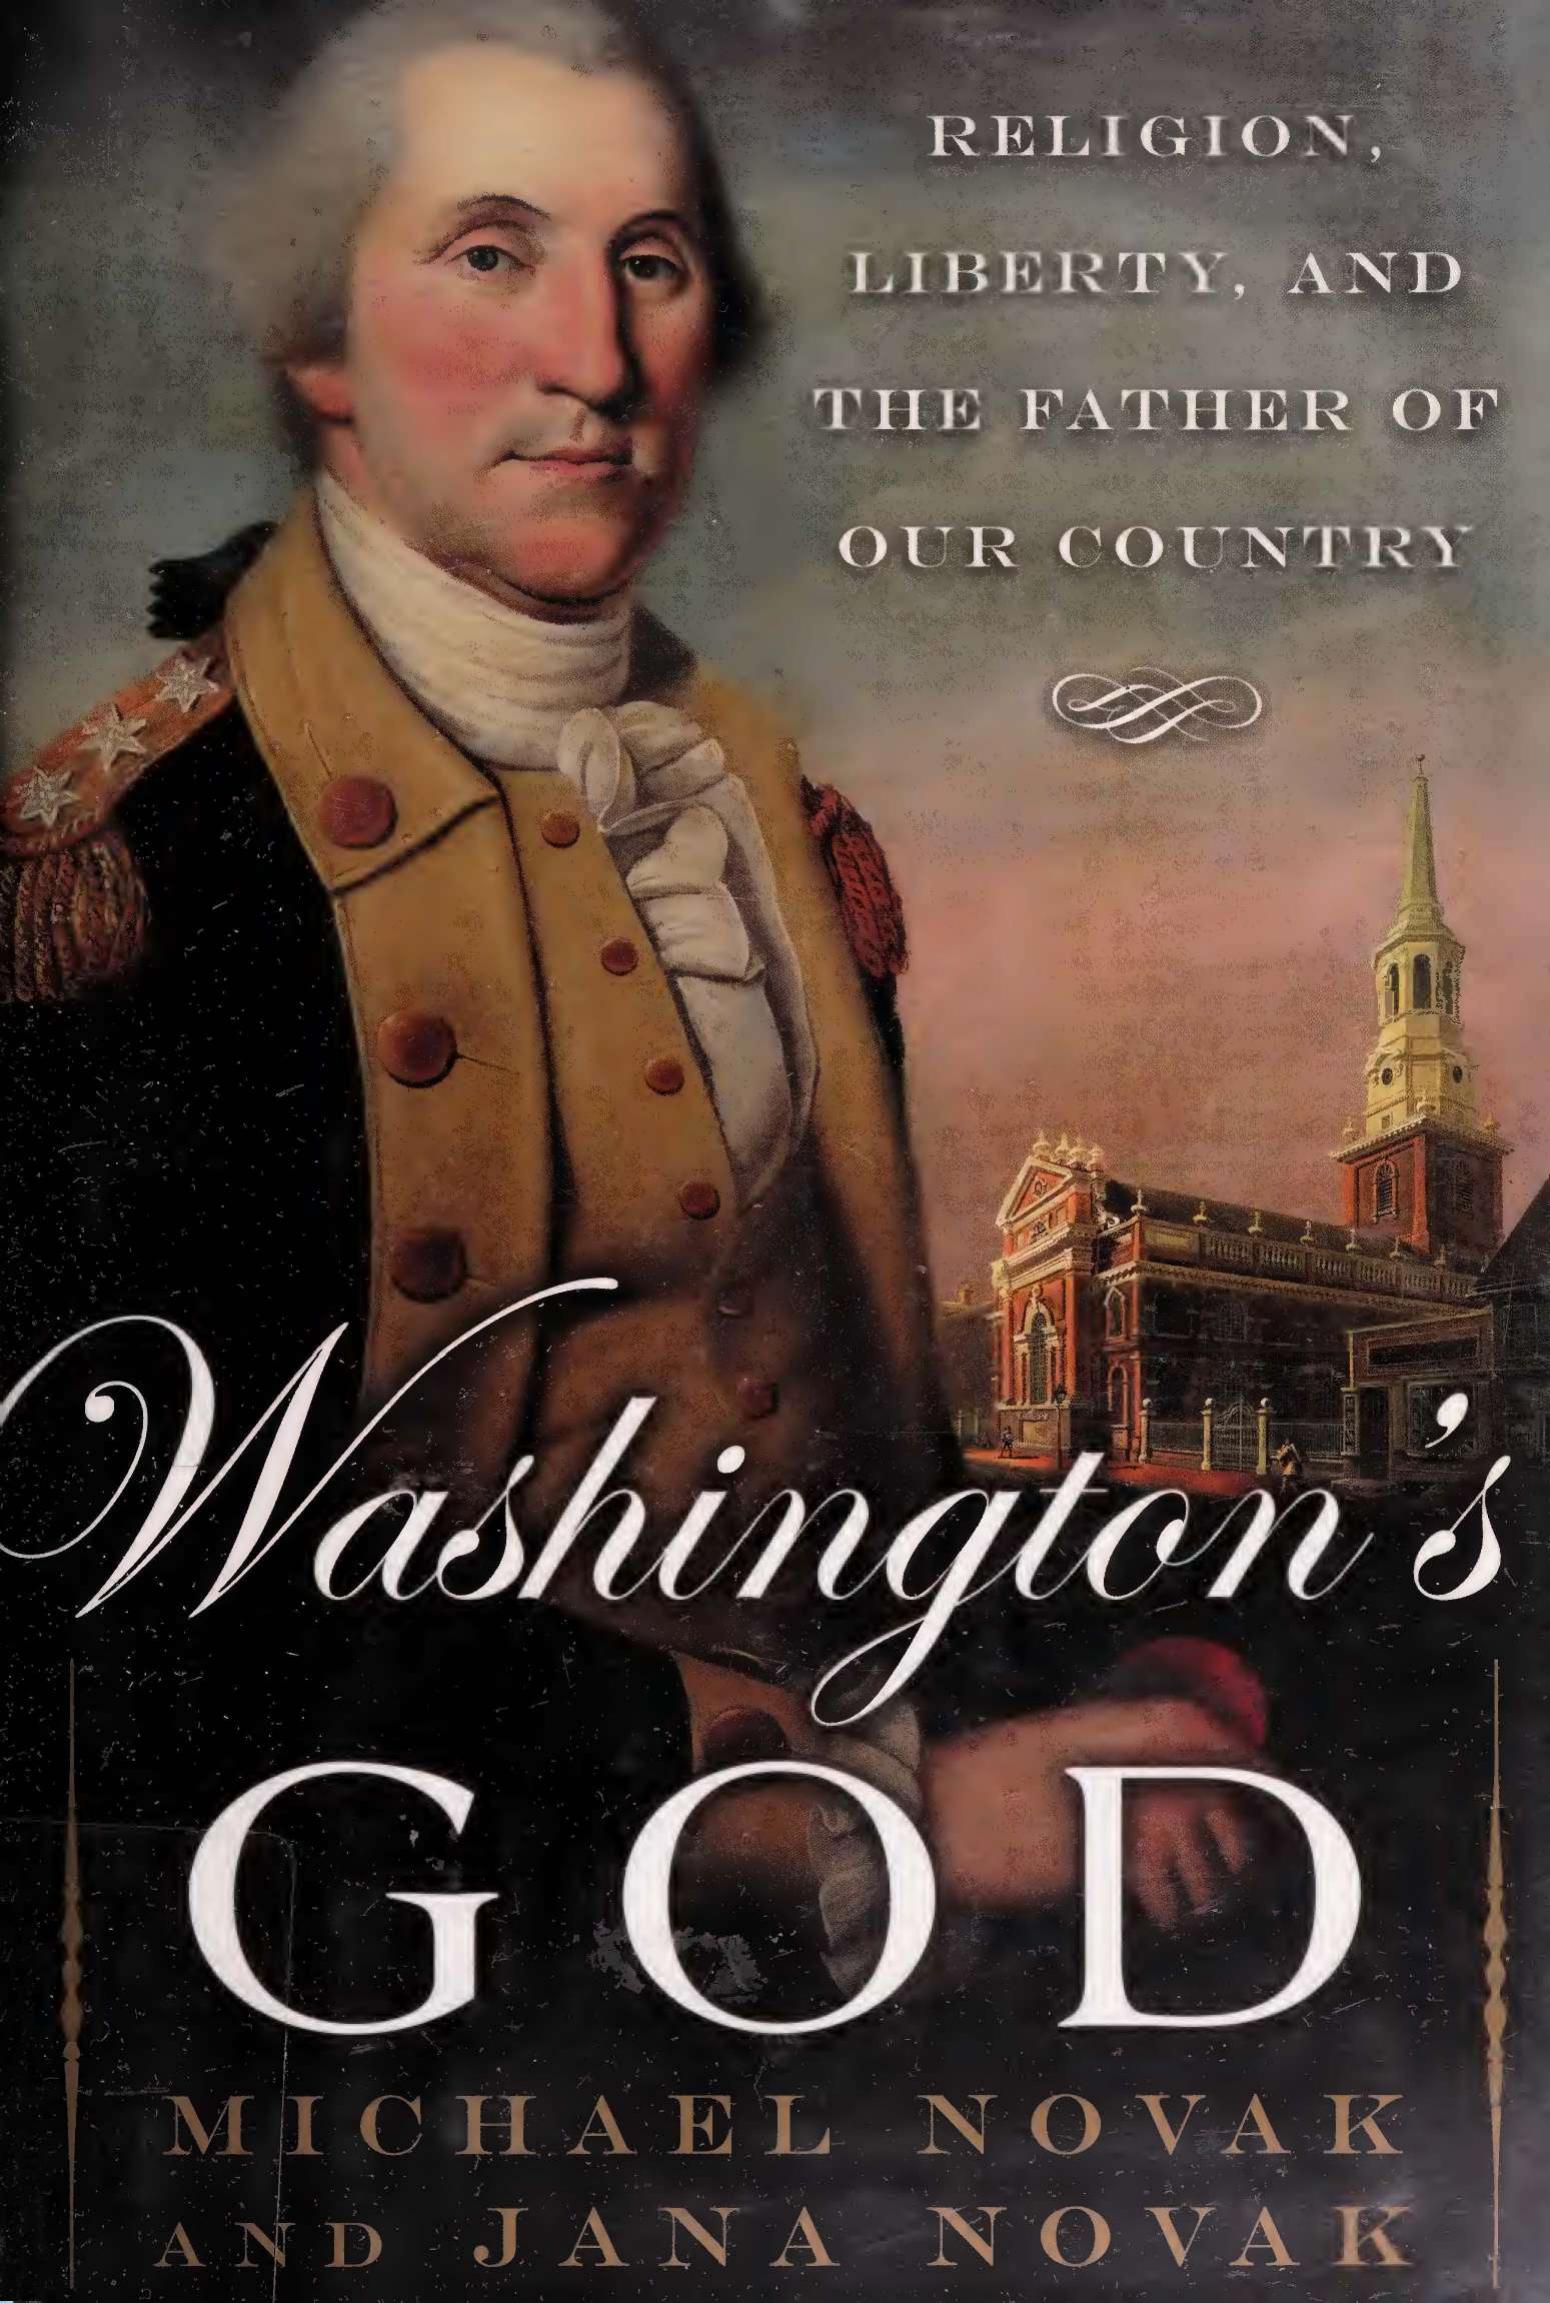 Washington's God - Religion, Liberty and Father of Our Country by Michael Novak